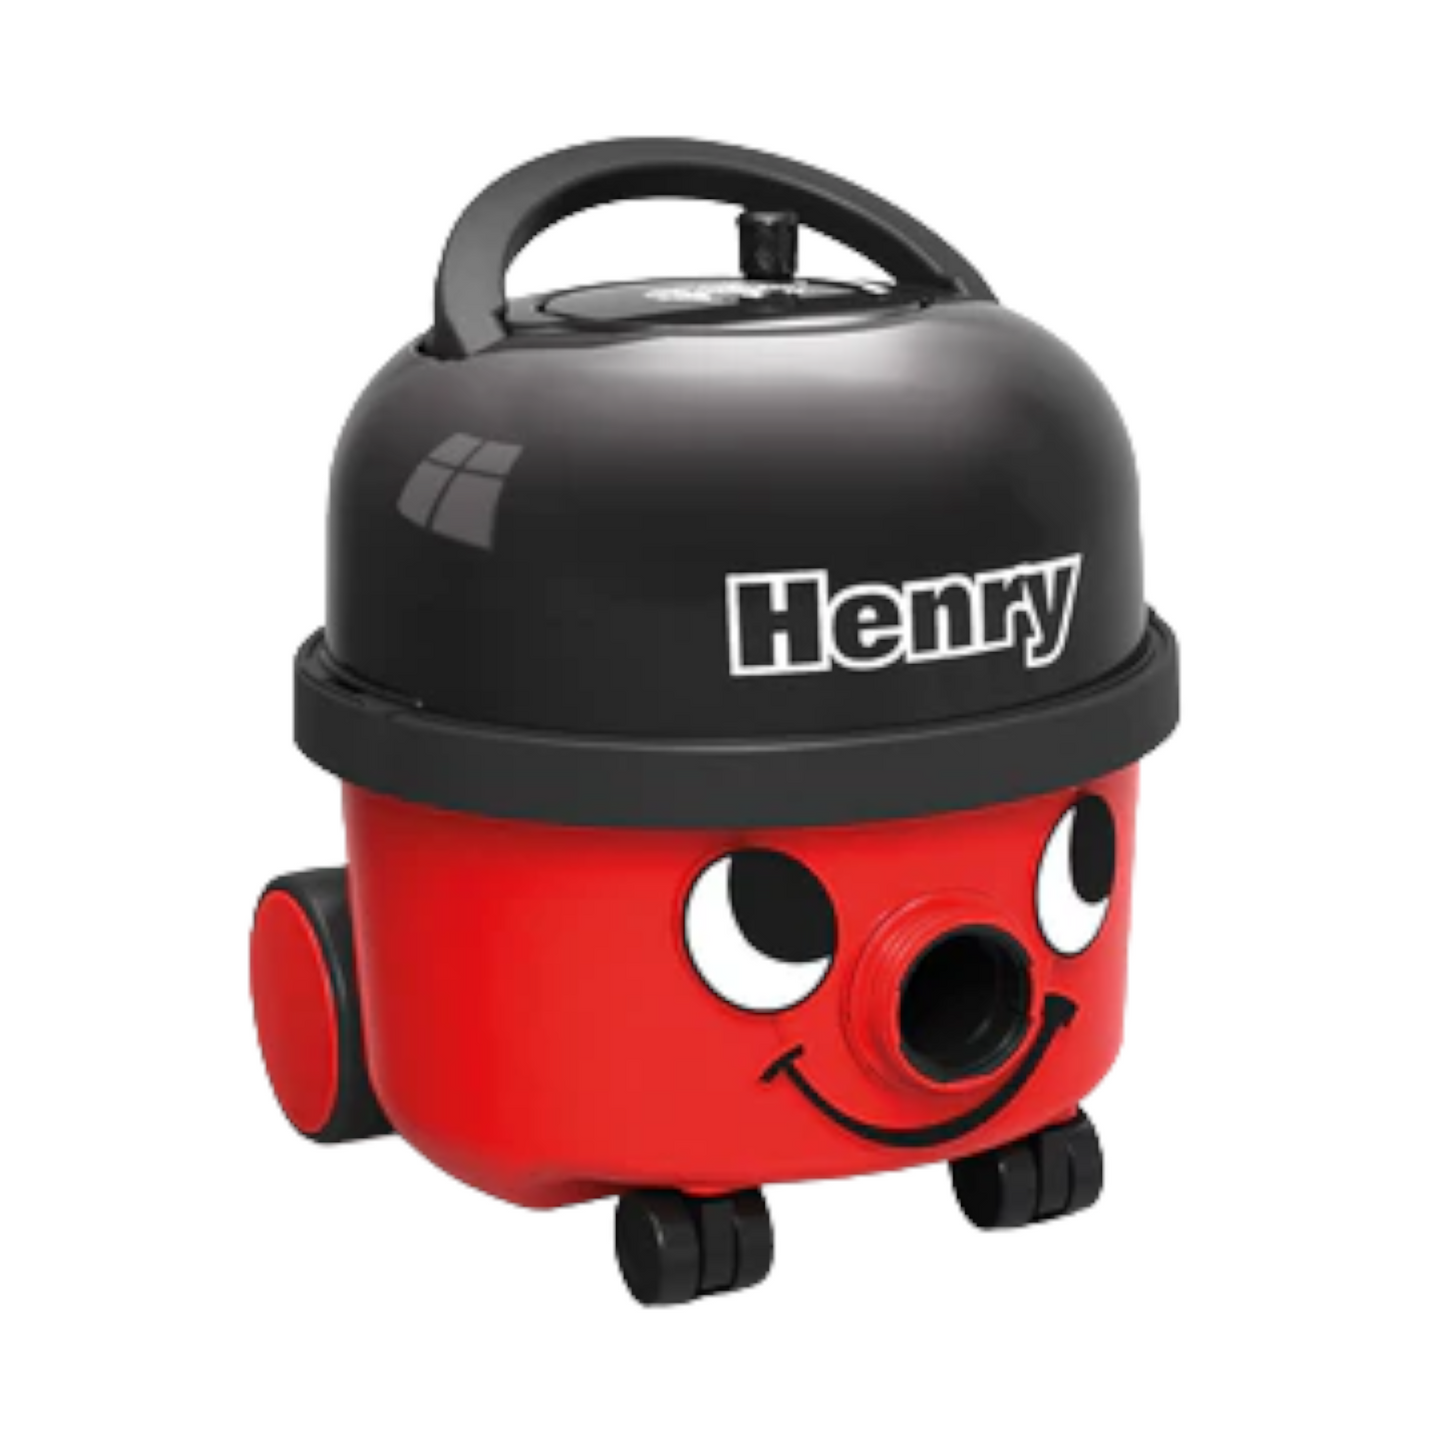 Henry 6 Liter Canister Vacuum for Home and Commercial Use